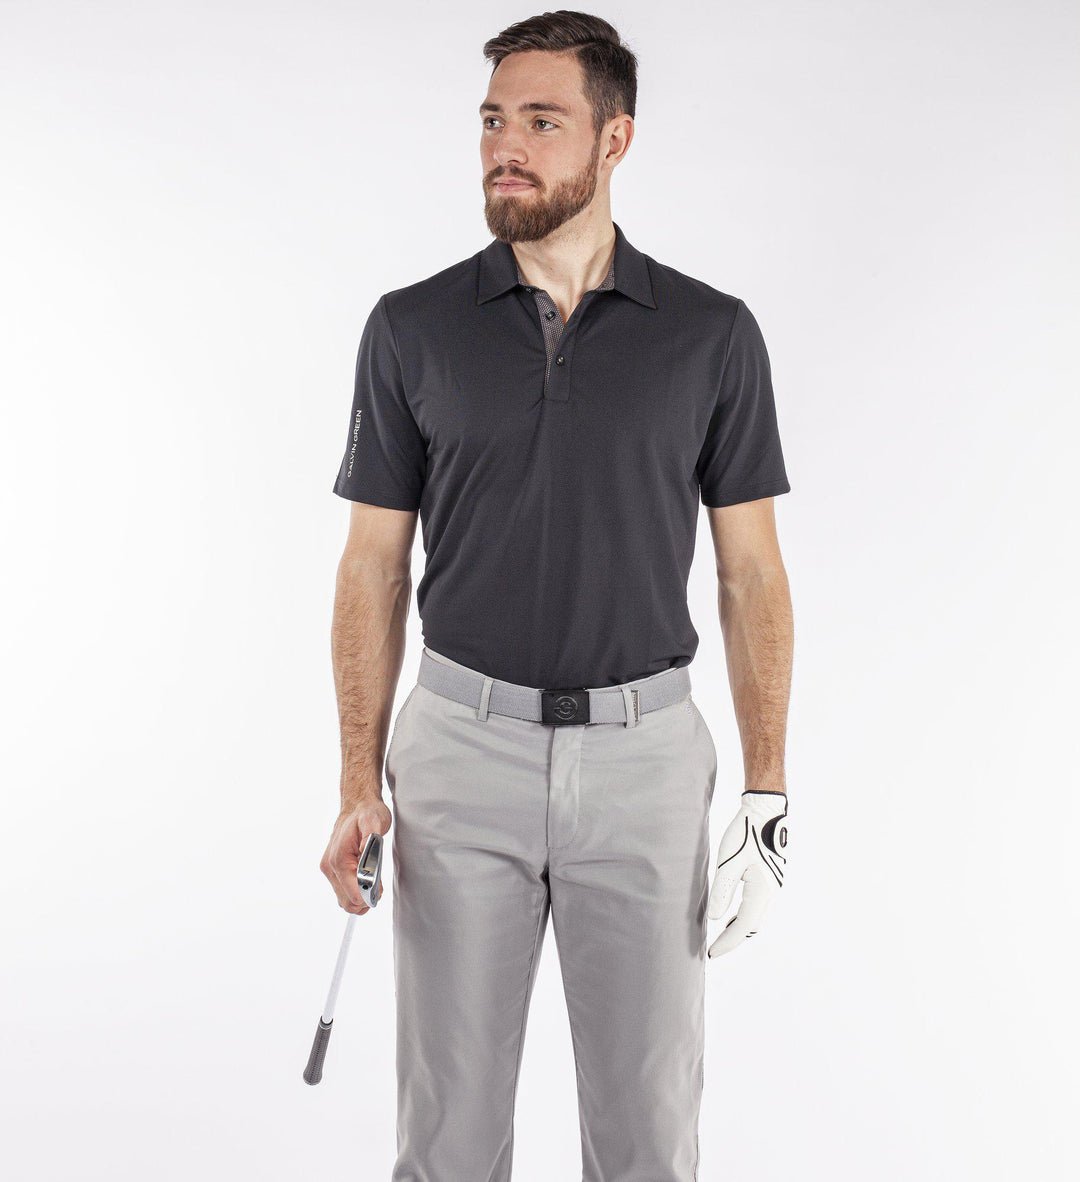 Milan is a Breathable short sleeve golf shirt for Men in the color Black(1)